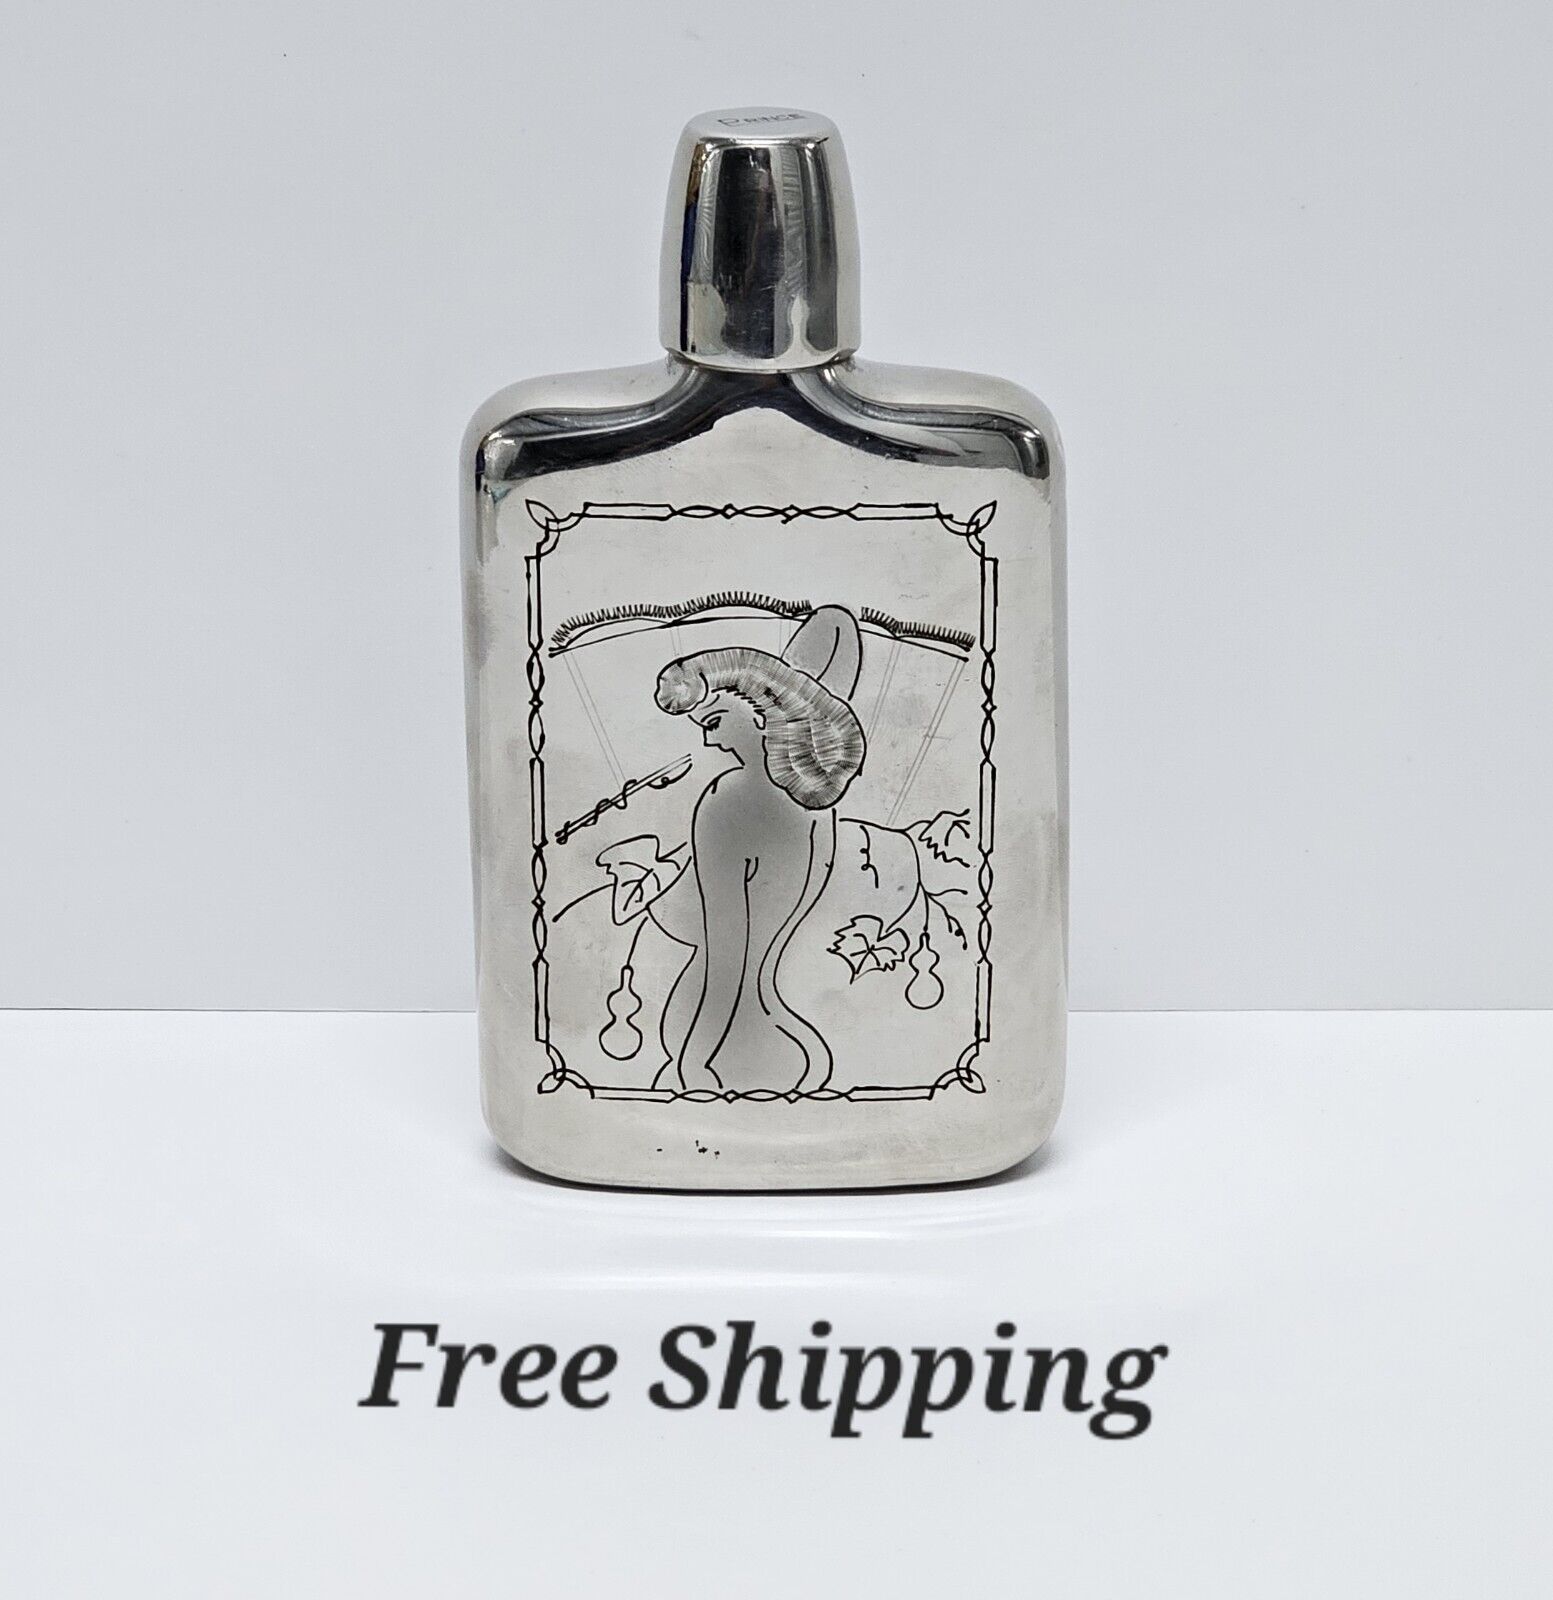 Vintage Prince Engraved Etched NUDE Women Metal Flask Screw Lid & Top Shot Glass